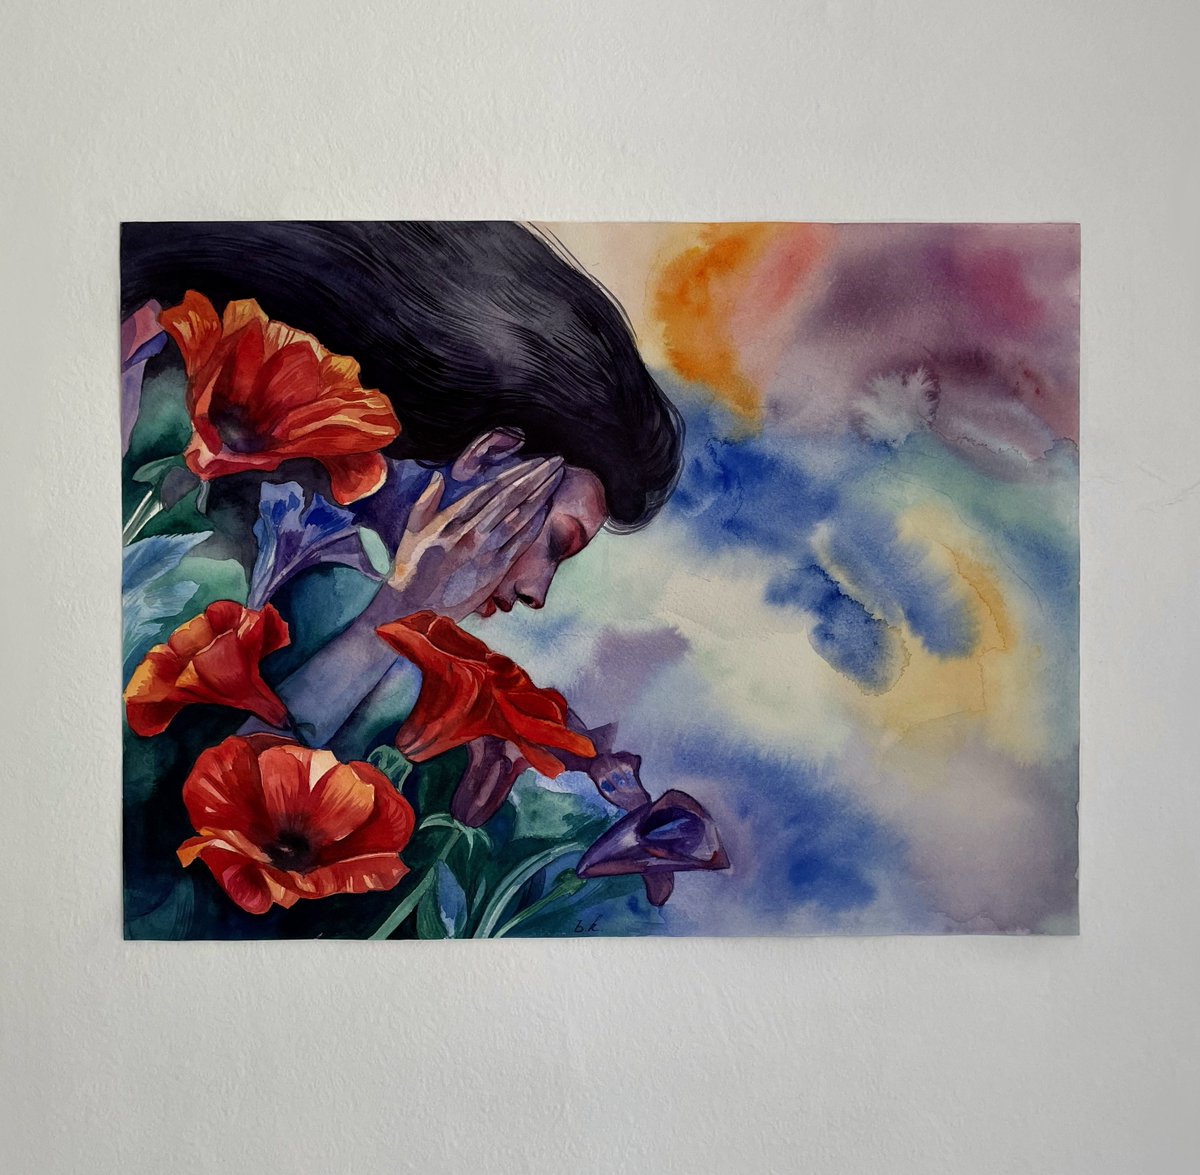 GM/ New drop 🌹

“Solitude” 
Physical original painting (watercolour) 

5 SOL on exchange 
Shipping included! 

Link👇🏻